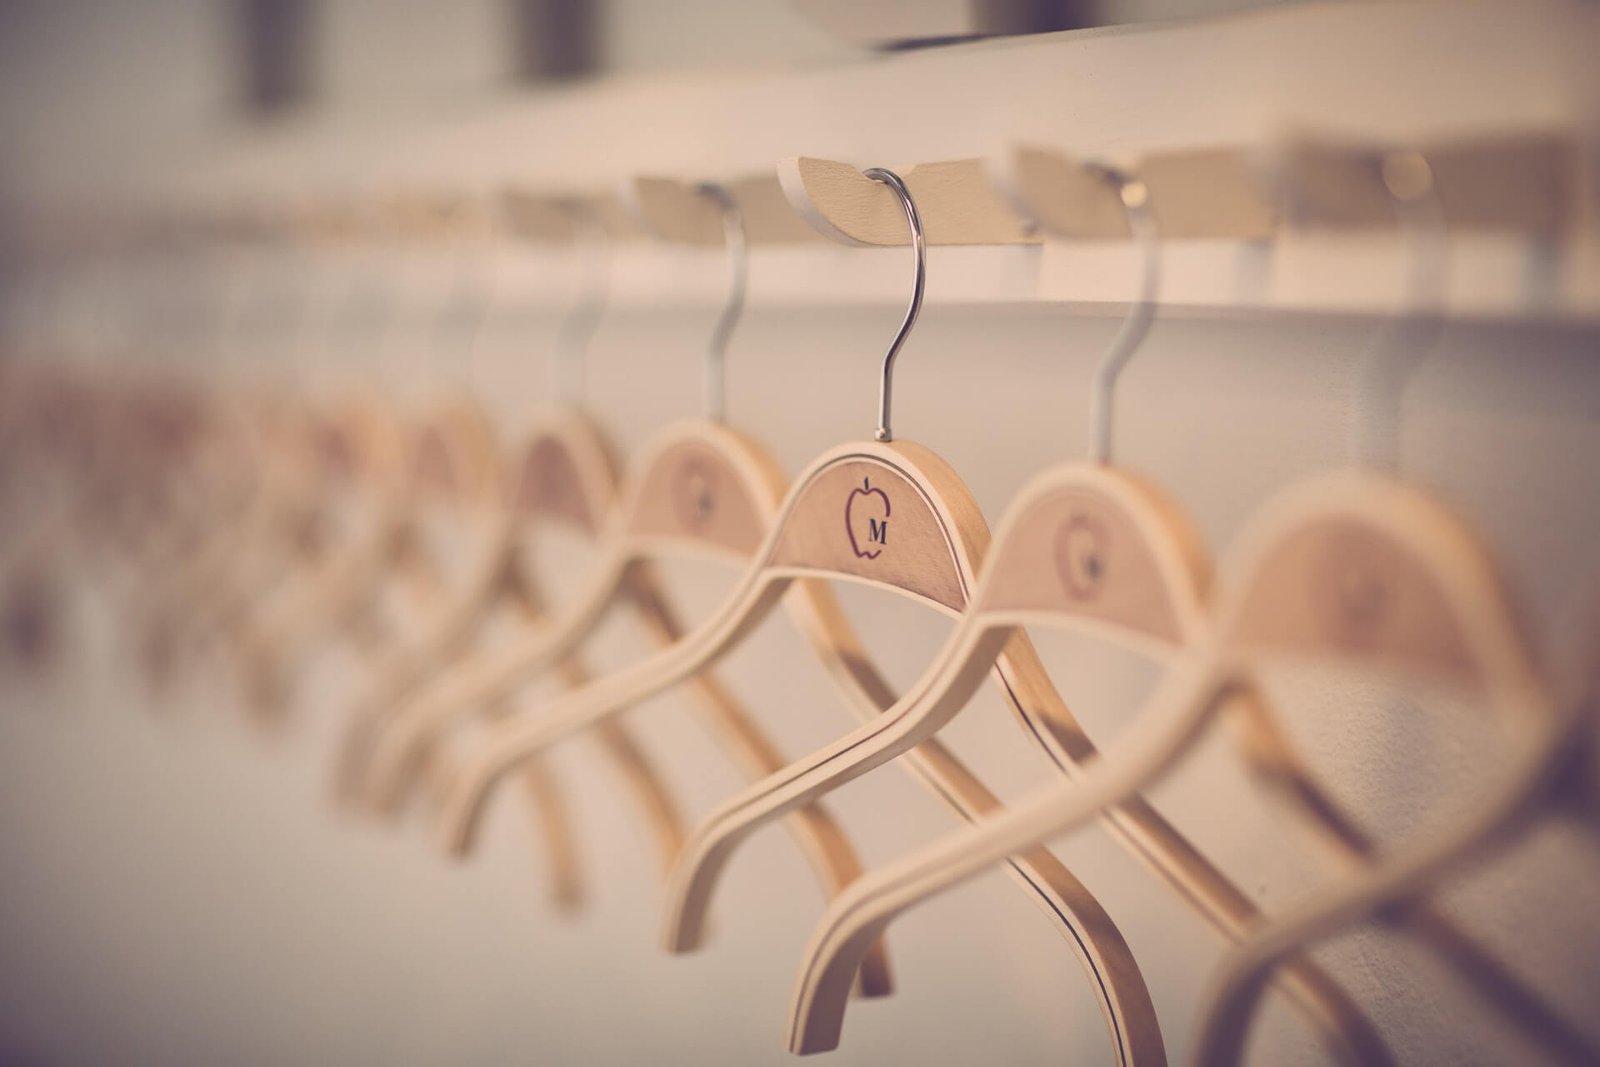 Why the Type of Clothes Hangers You Use Actually Matters